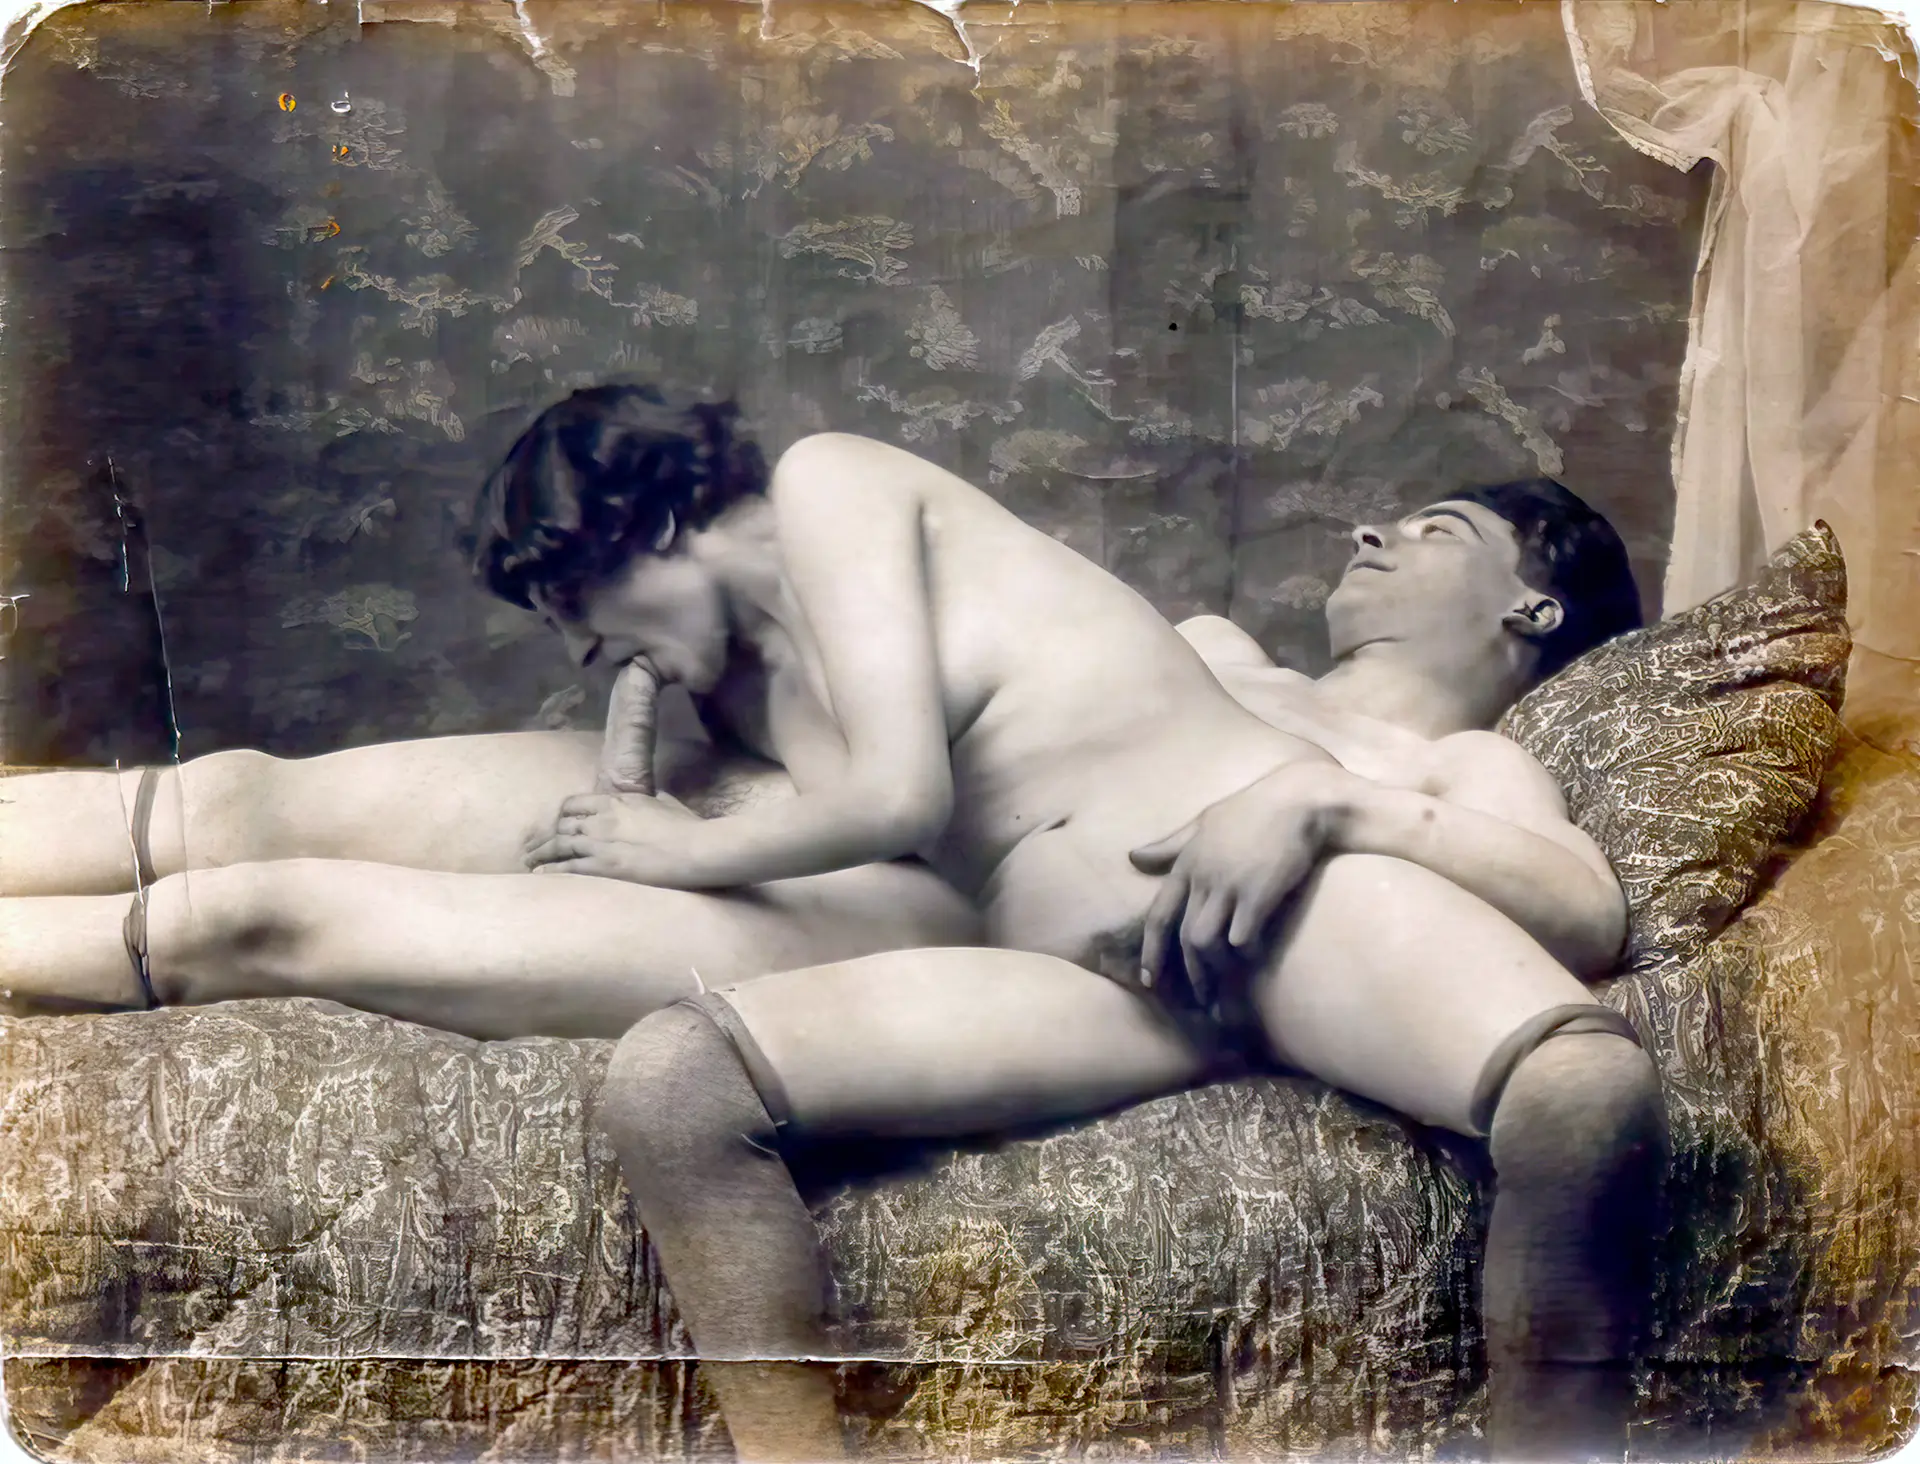 Antique man with a hard-on enjoys an oral satisfaction from his lady